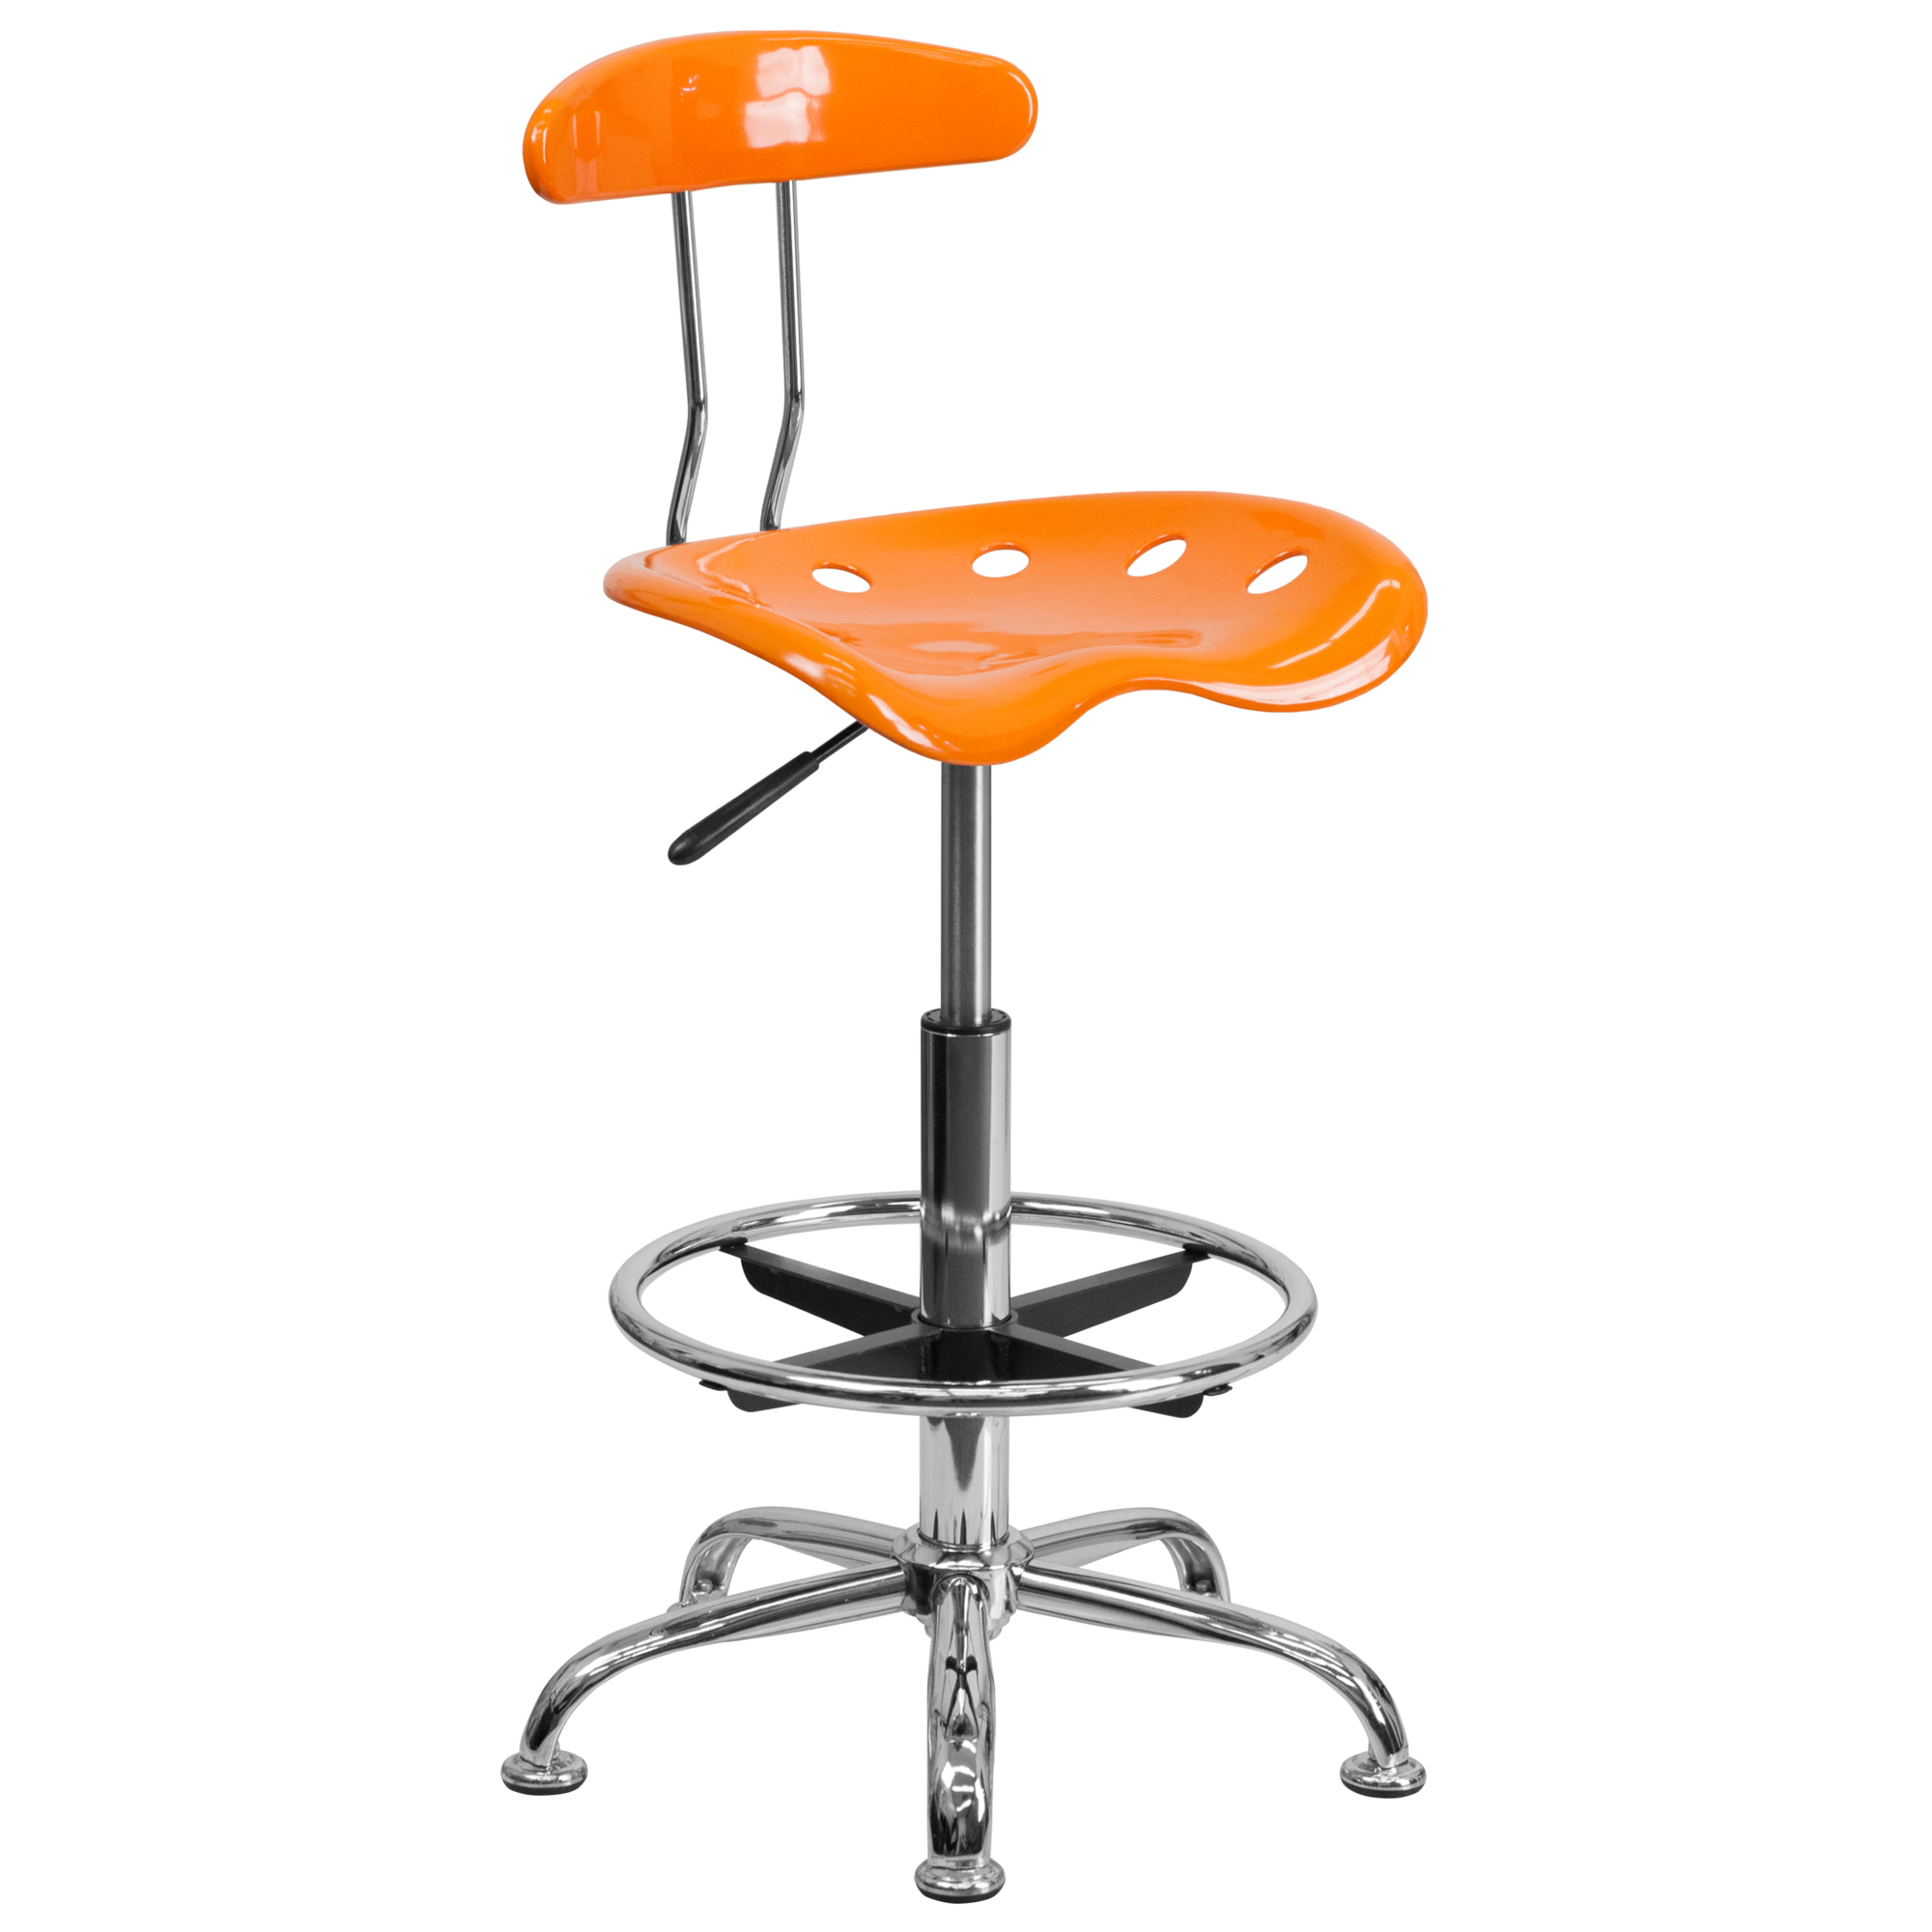 Flash Furniture, Vibrant Orange and Chrome Drafting Stool, Primary Color Orange, Included (qty.) 1, Model LF215ORANYELL